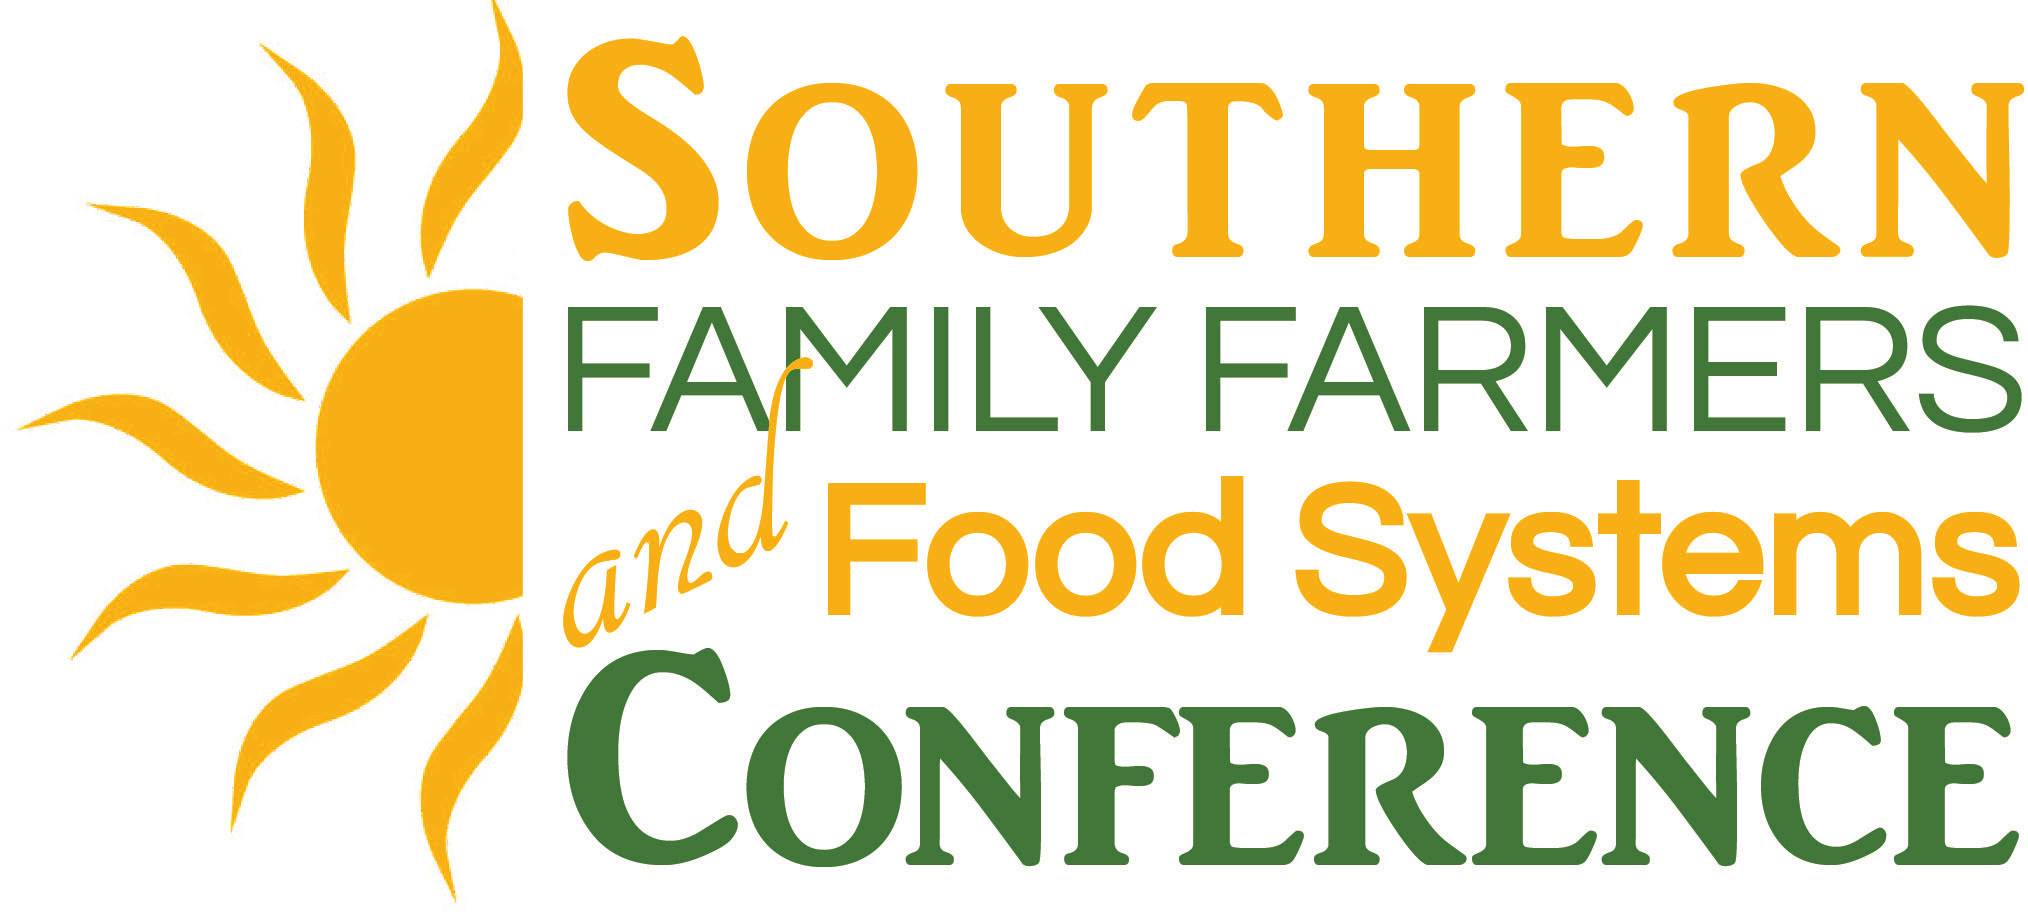 Southern Family Farmers & Food Systems Conference logo